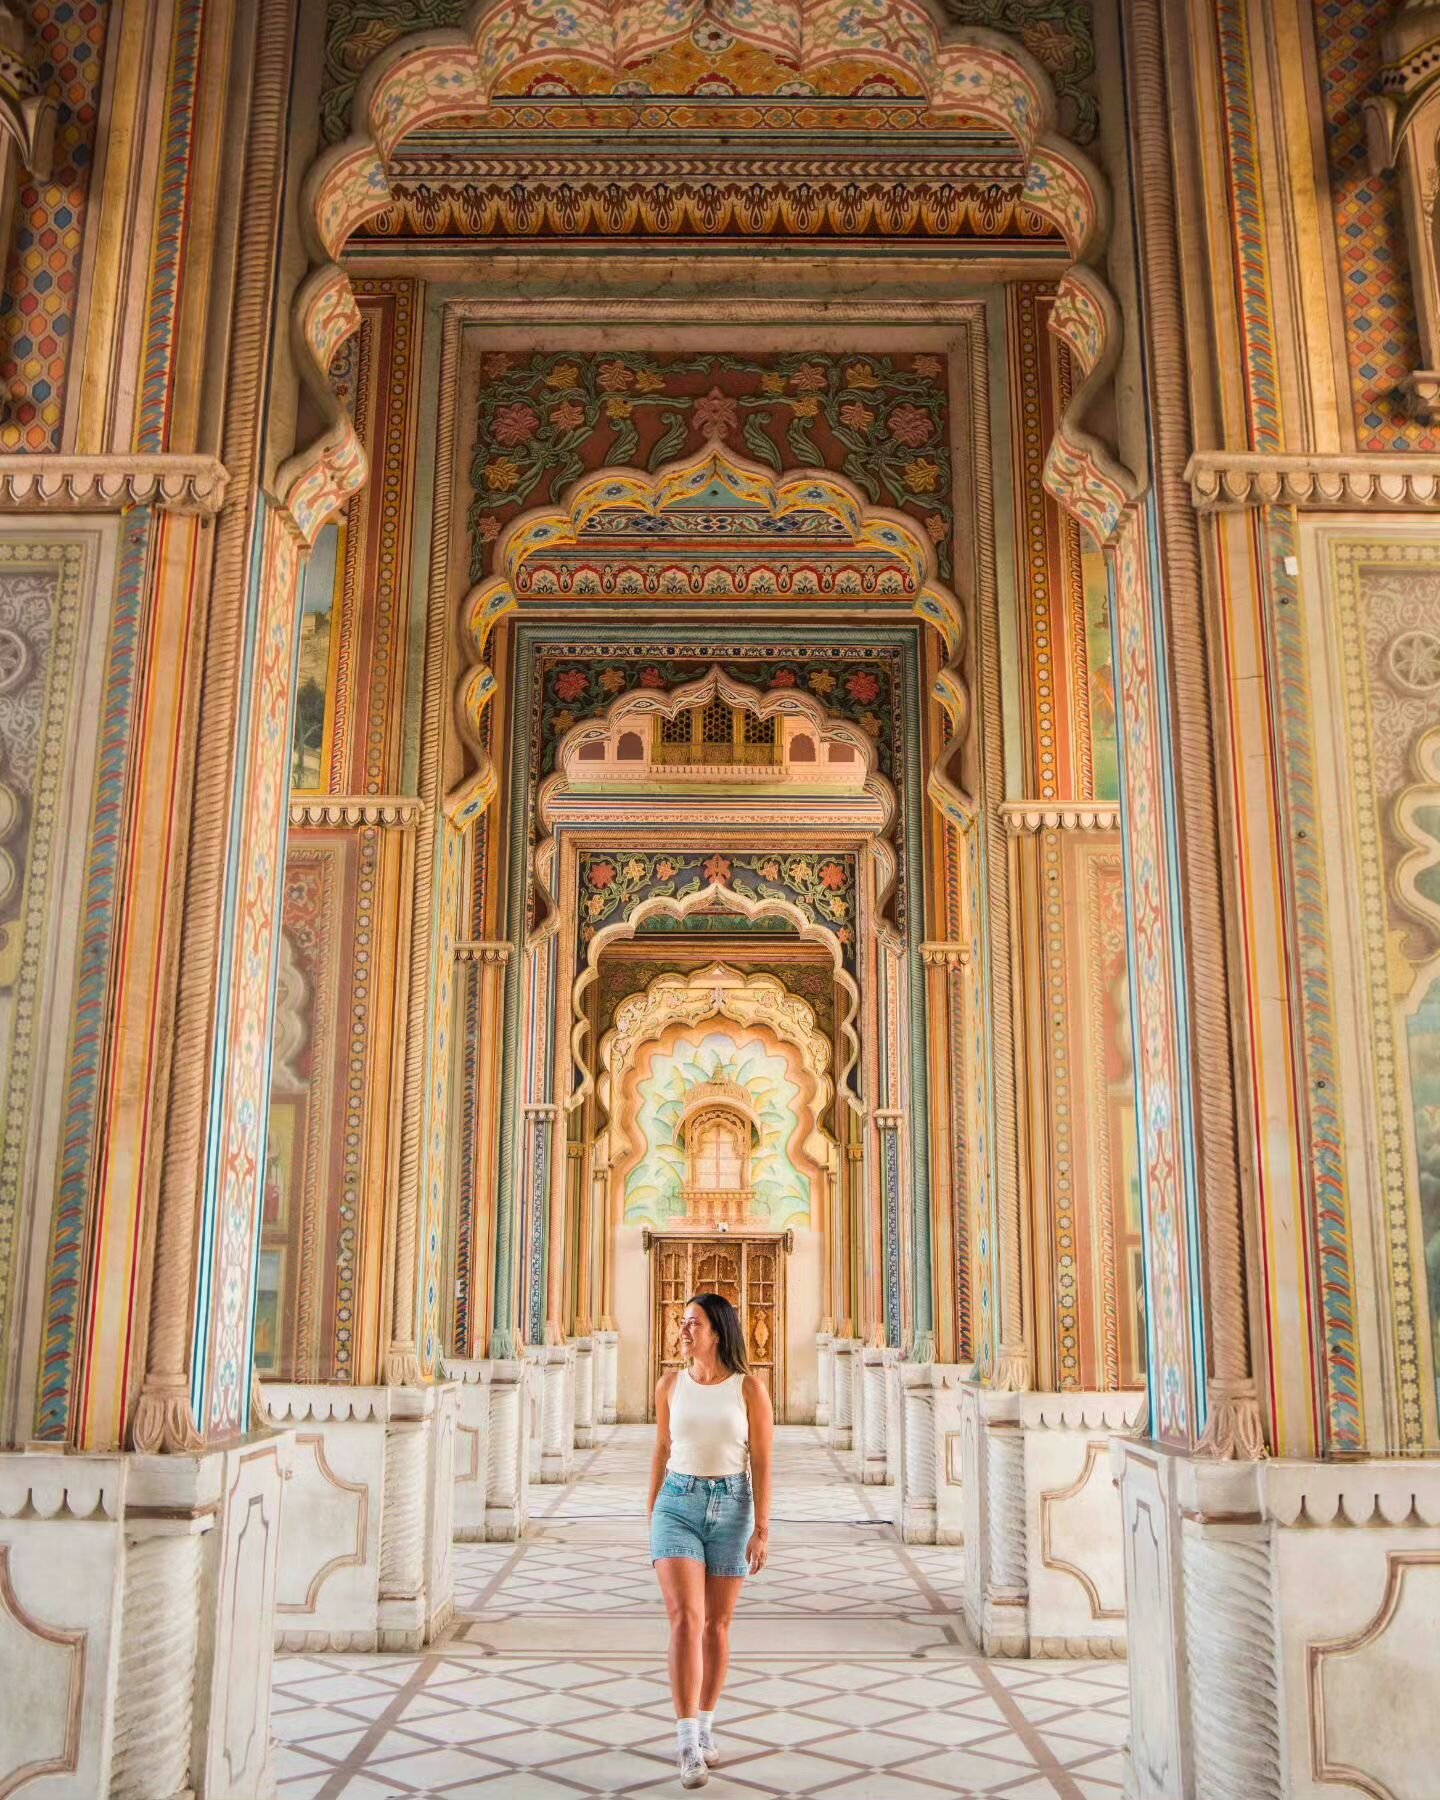 Jaipur Guide ✨️ SAVE ✨️ for your next visit! 

✨️ Patrika Gate: This is an open area so you can visit at any time without having to worry about entry times/fees. I would recommend going early in the morning if possible to avoid crowds

✨️ @the_old_ph